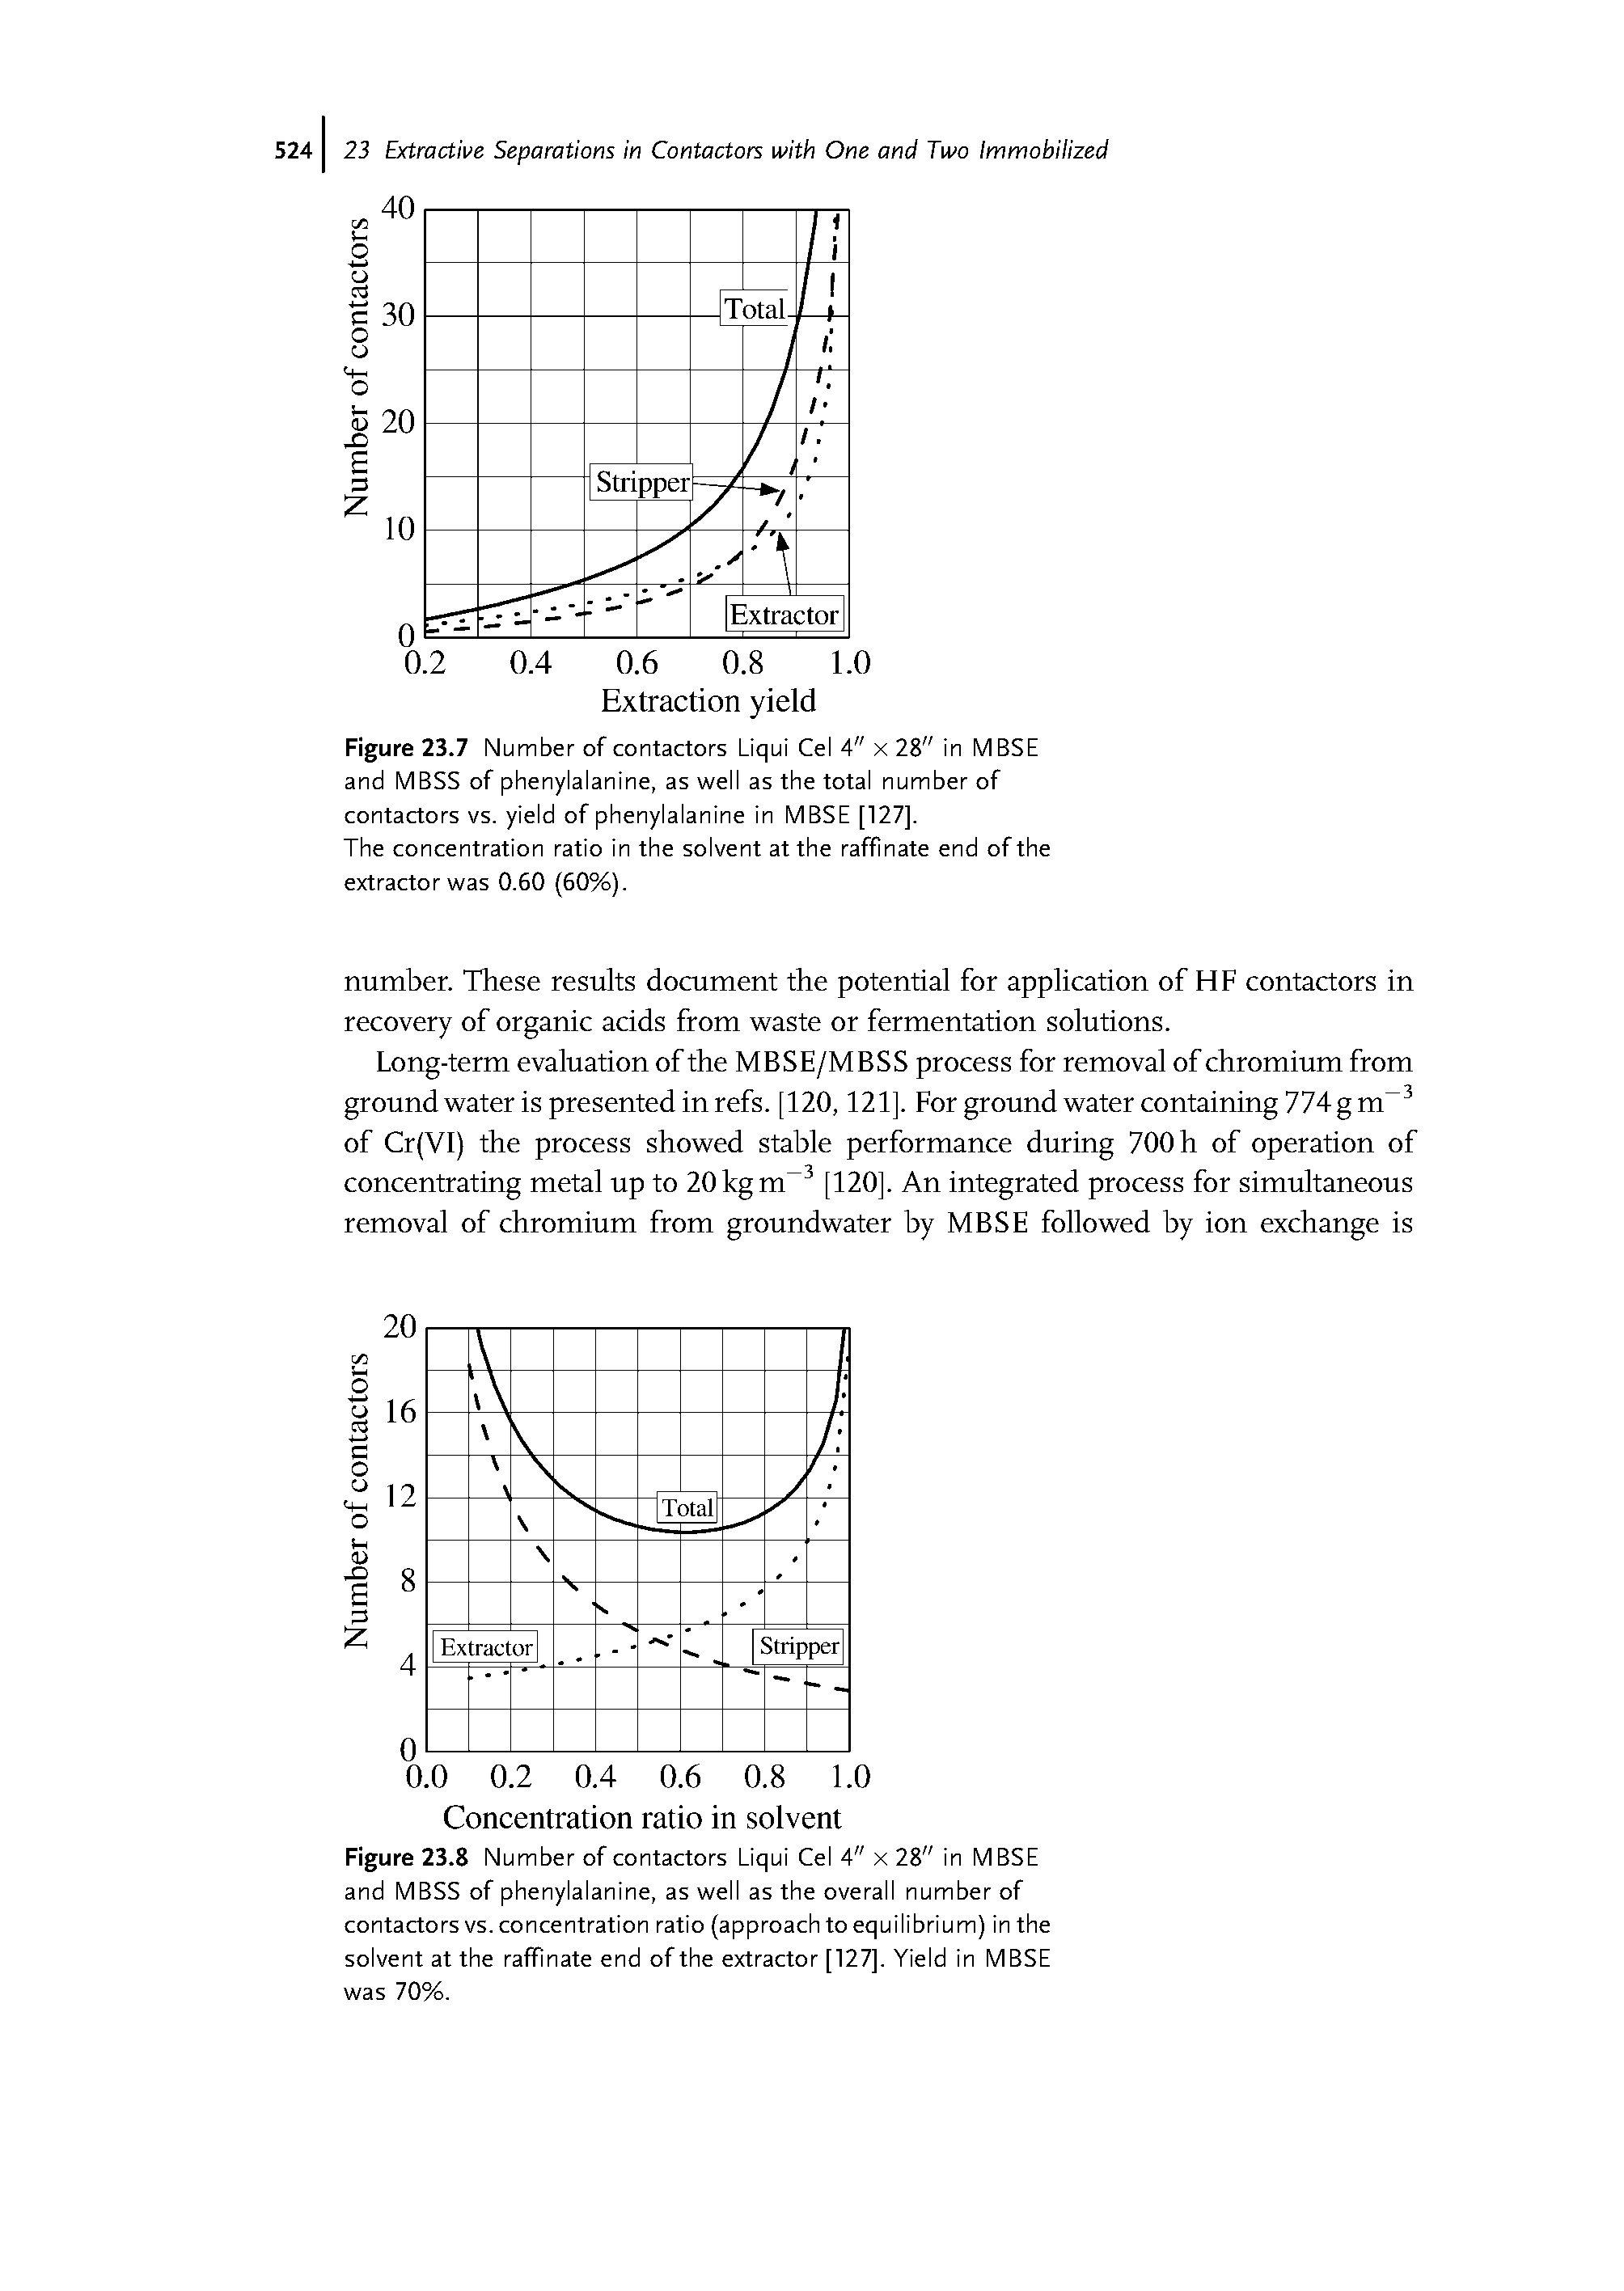 Figure 23.8 Number of contactors Liqui Cel 4" x 28" in MBSE and MBSS of phenylalanine, as well as the overall number of contactors vs. concentration ratio (approach to equilibrium) in the solvent at the raffinate end of the extractor [127], Yield in MBSE was 70%.